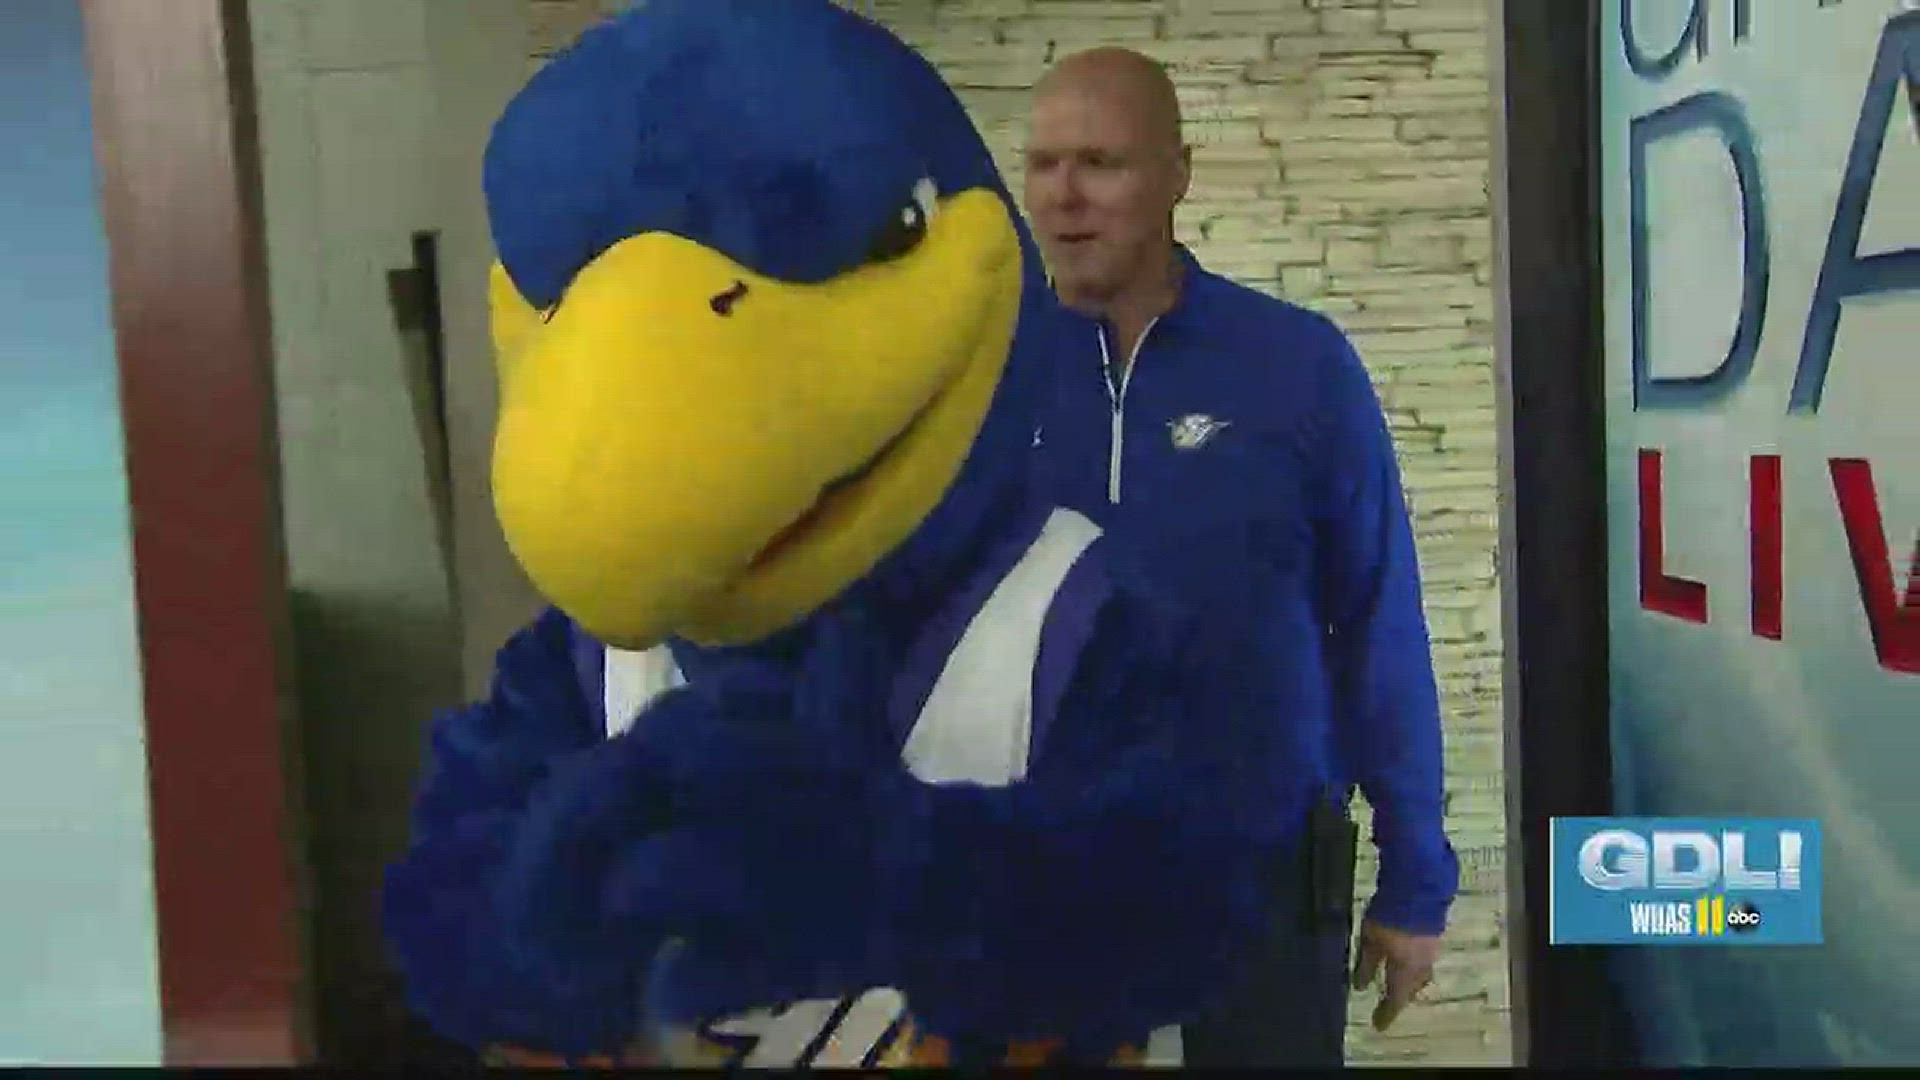 Spalding University has a new mascot and they need your help naming him.